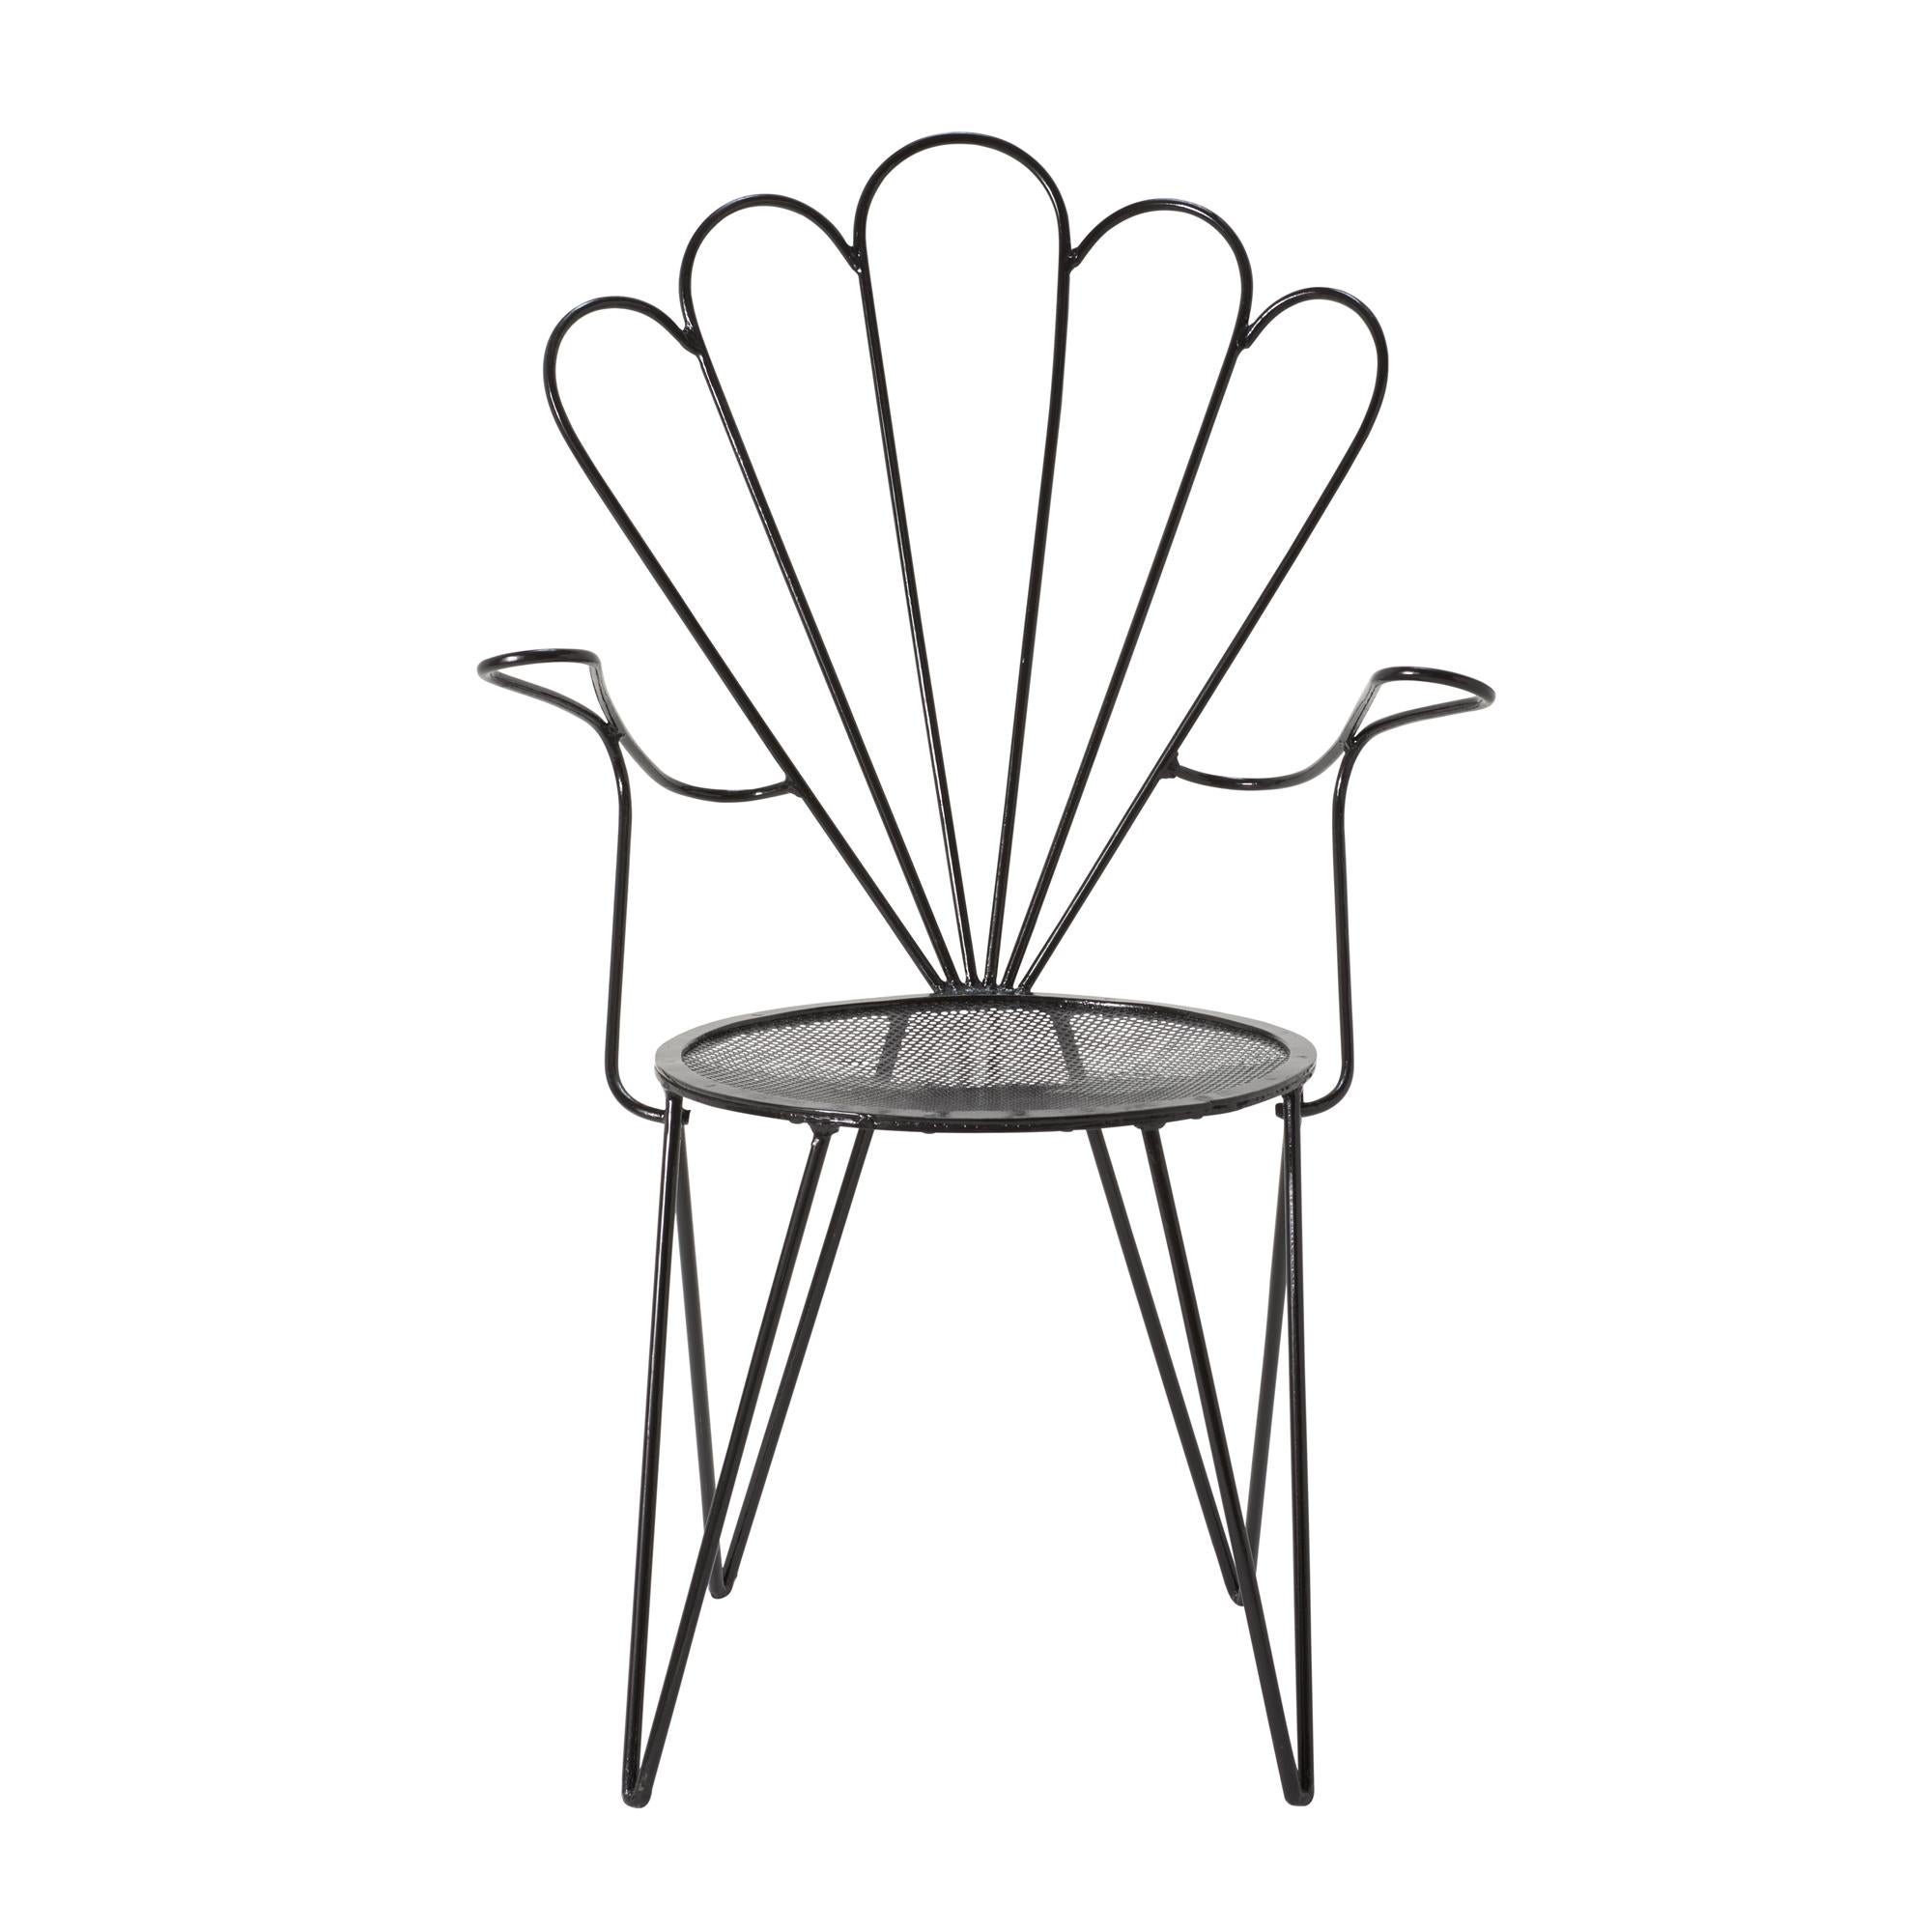 Set of 4 charming French iron garden chairs painted in black.

Since Schumacher was founded in 1889, our family-owned company has been synonymous with style, taste, and innovation. A passion for luxury and an unwavering commitment to beauty are